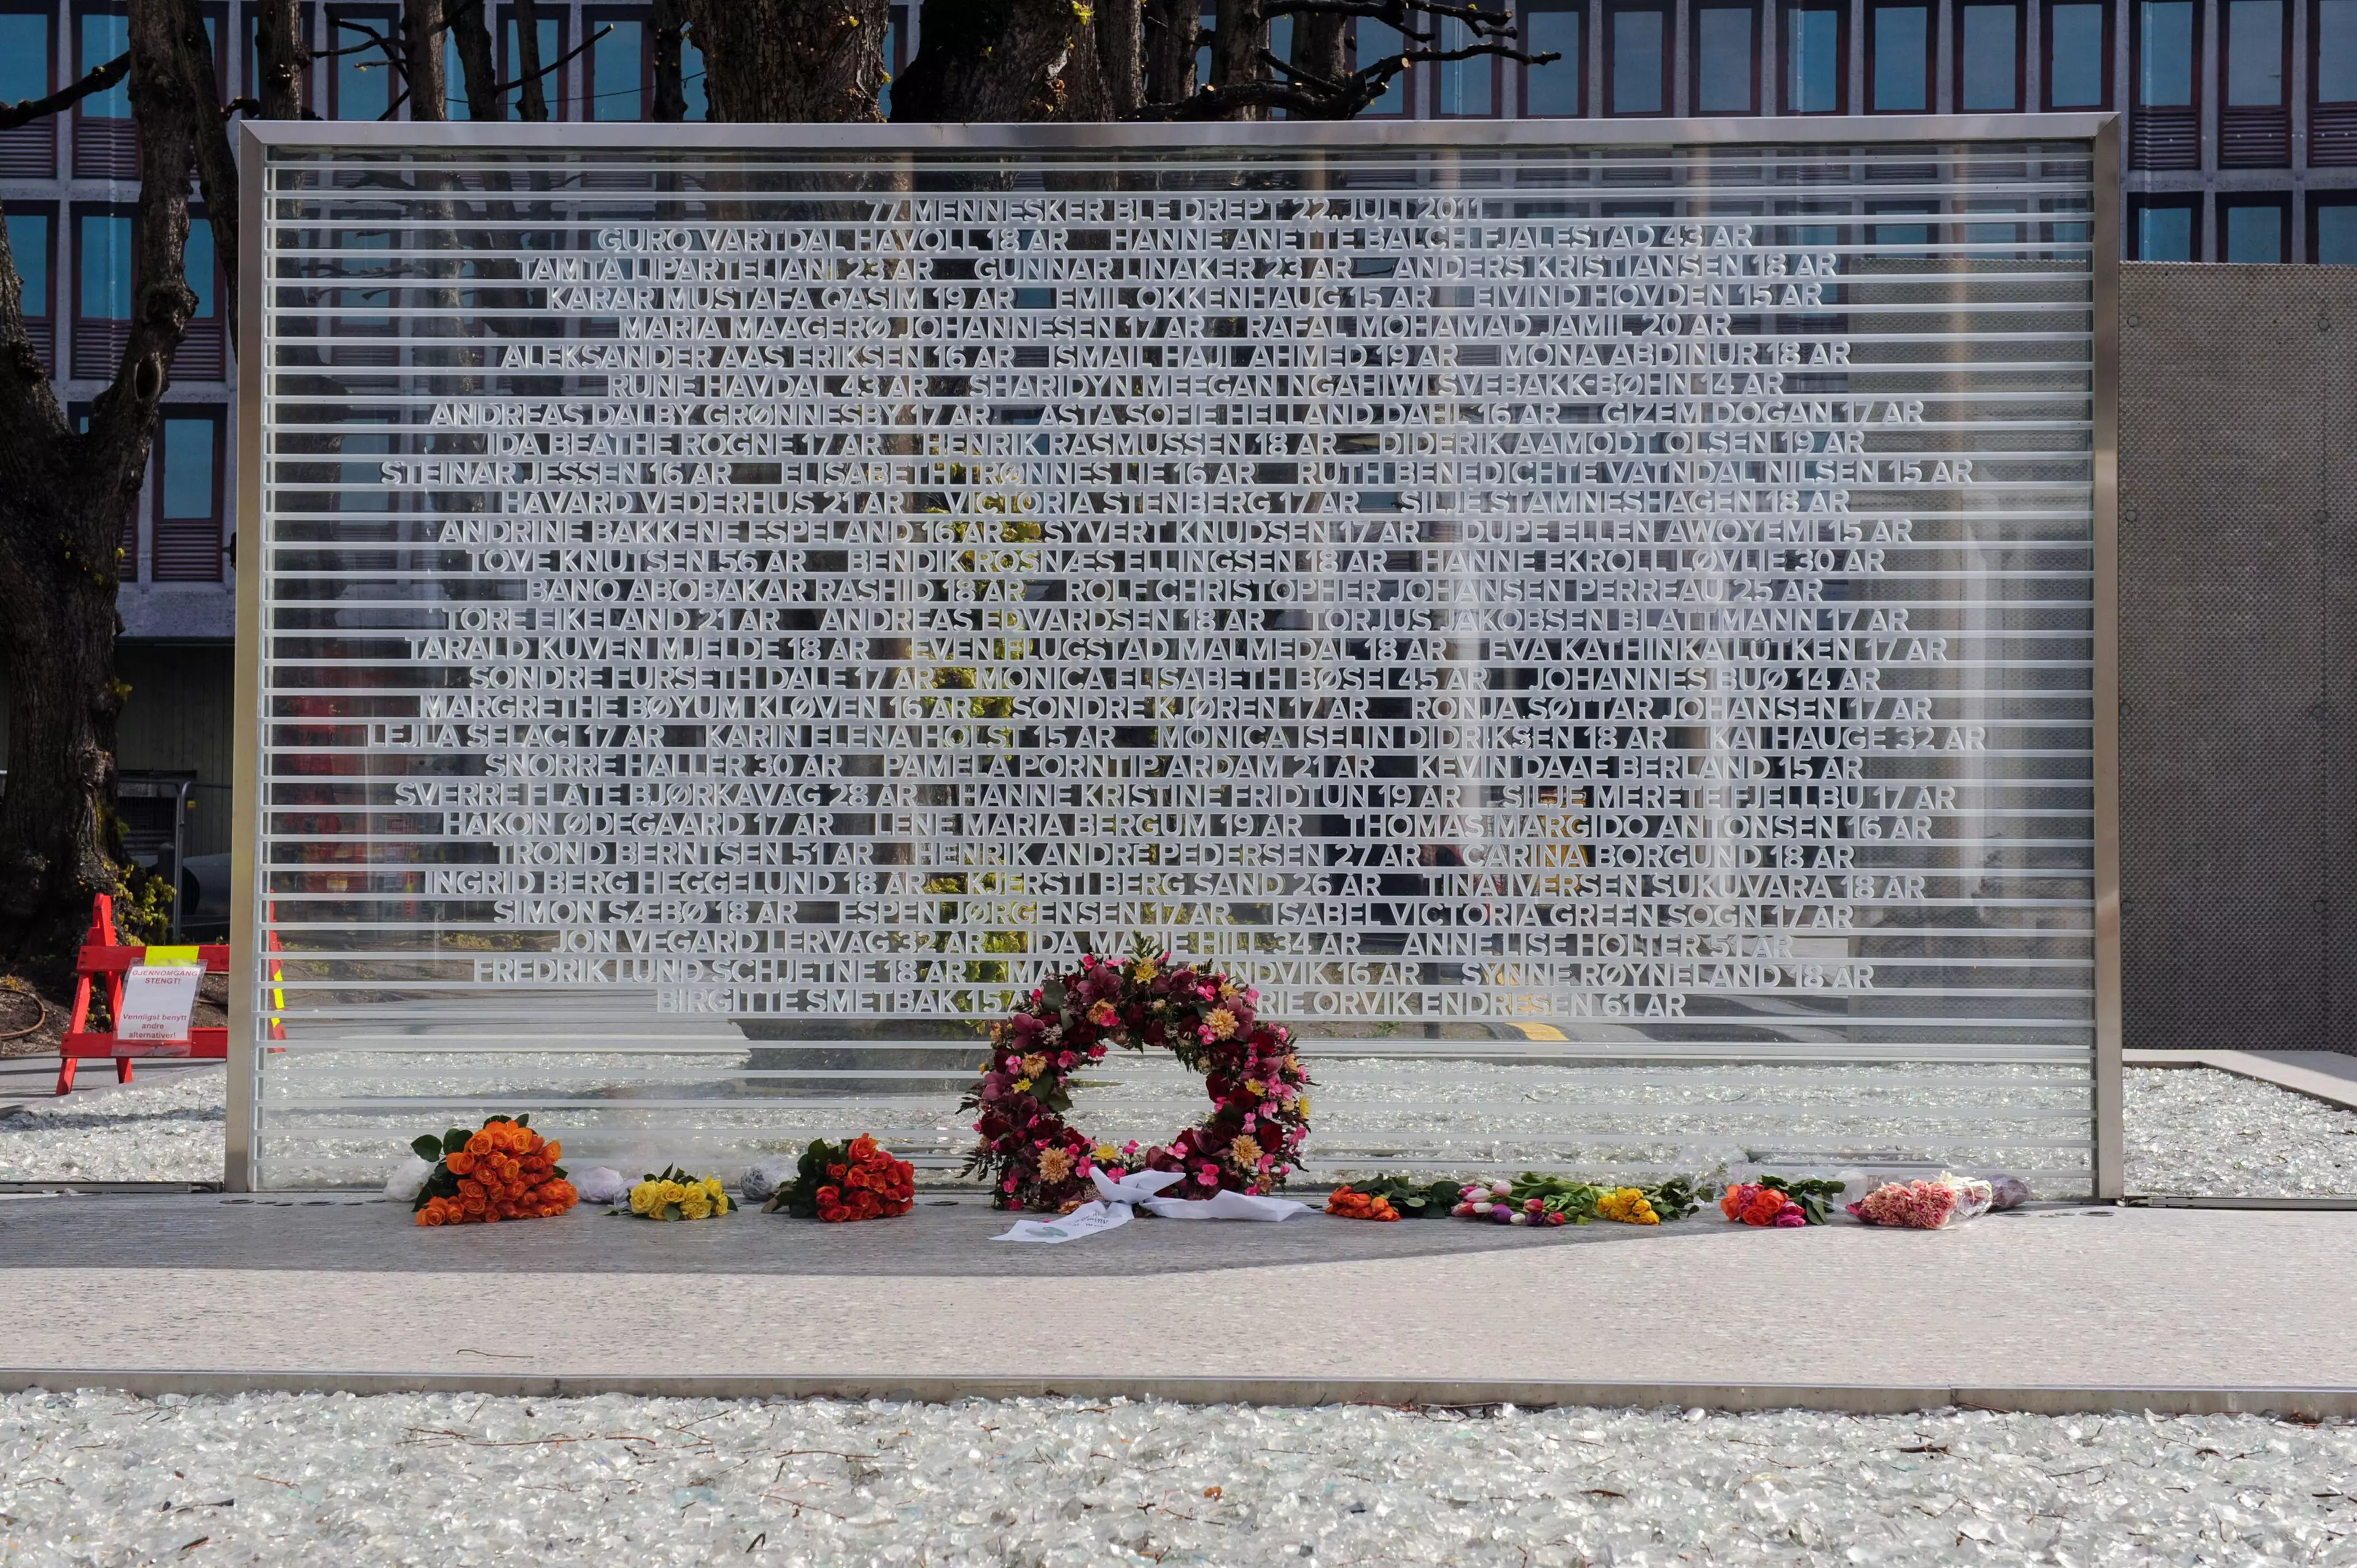 A memorial to the 77 victims in Oslo.